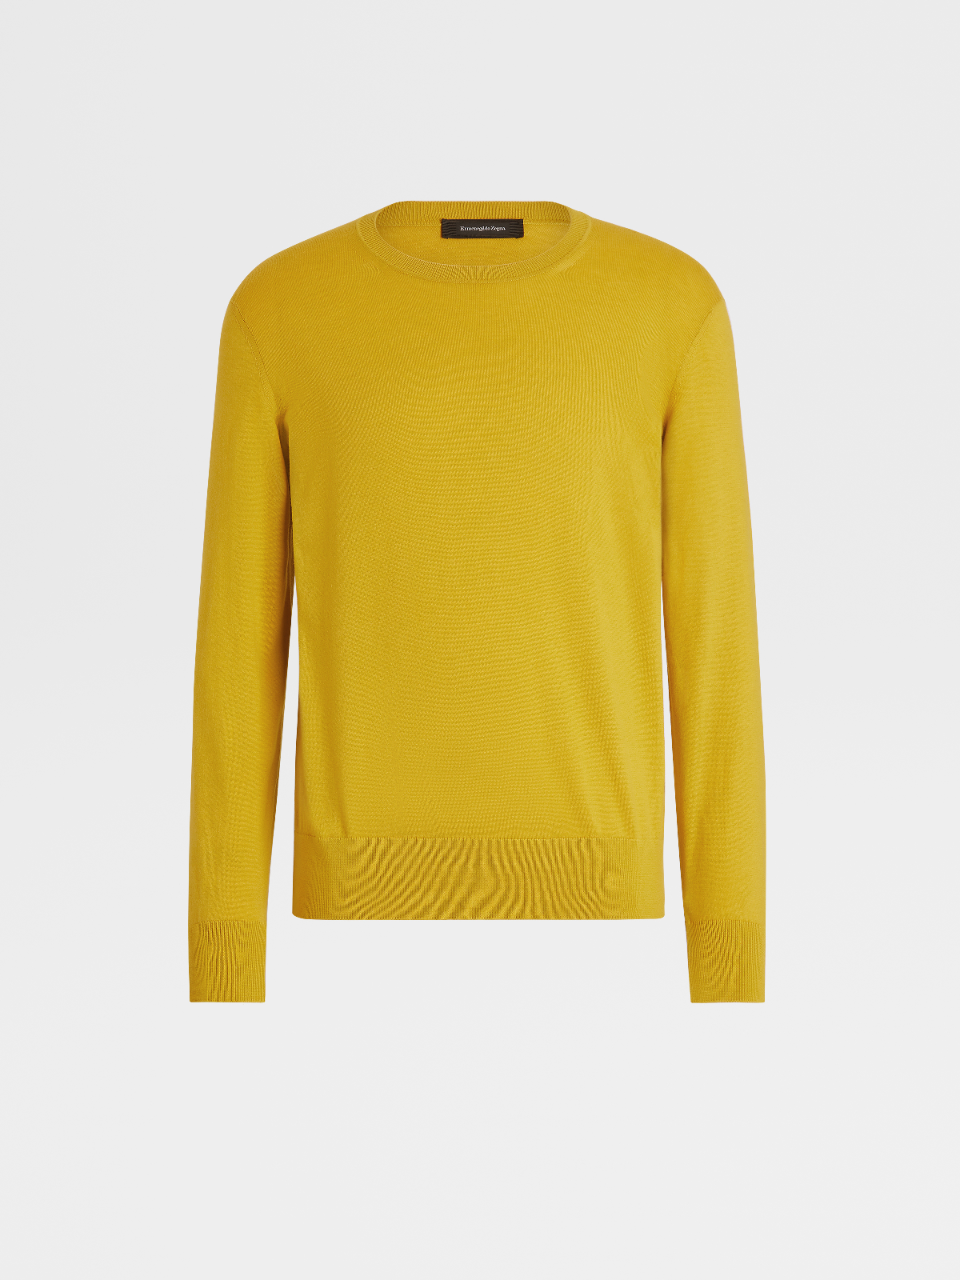 Yellow Baby Island Cotton and Cashmere Knit Crewneck